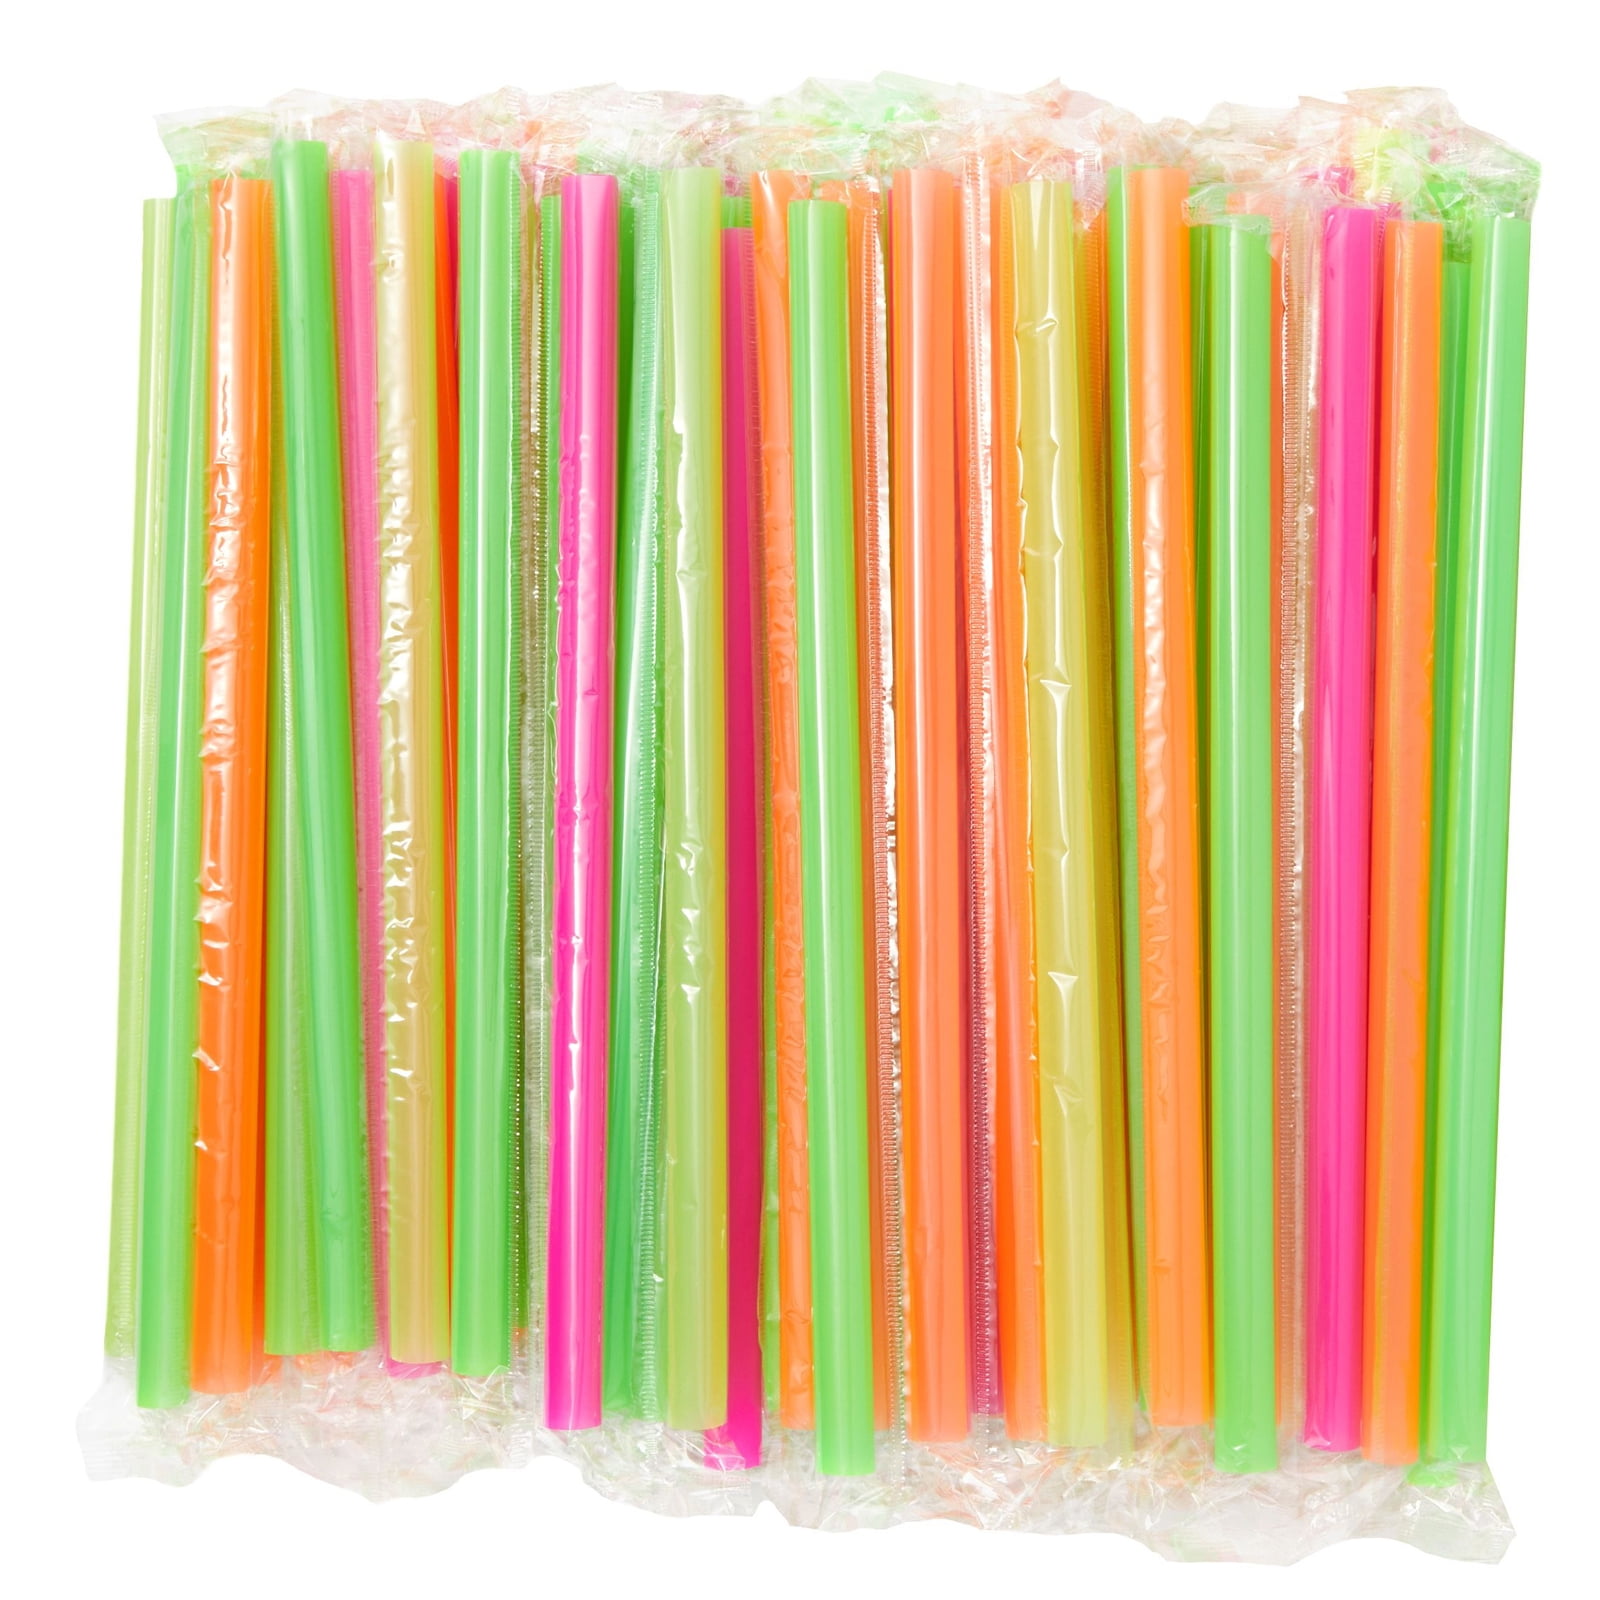 Details about   Bubble Boba Tea Fat Dringking Straws Party Smoothies Jumbo Thick Drink Straw 33p 